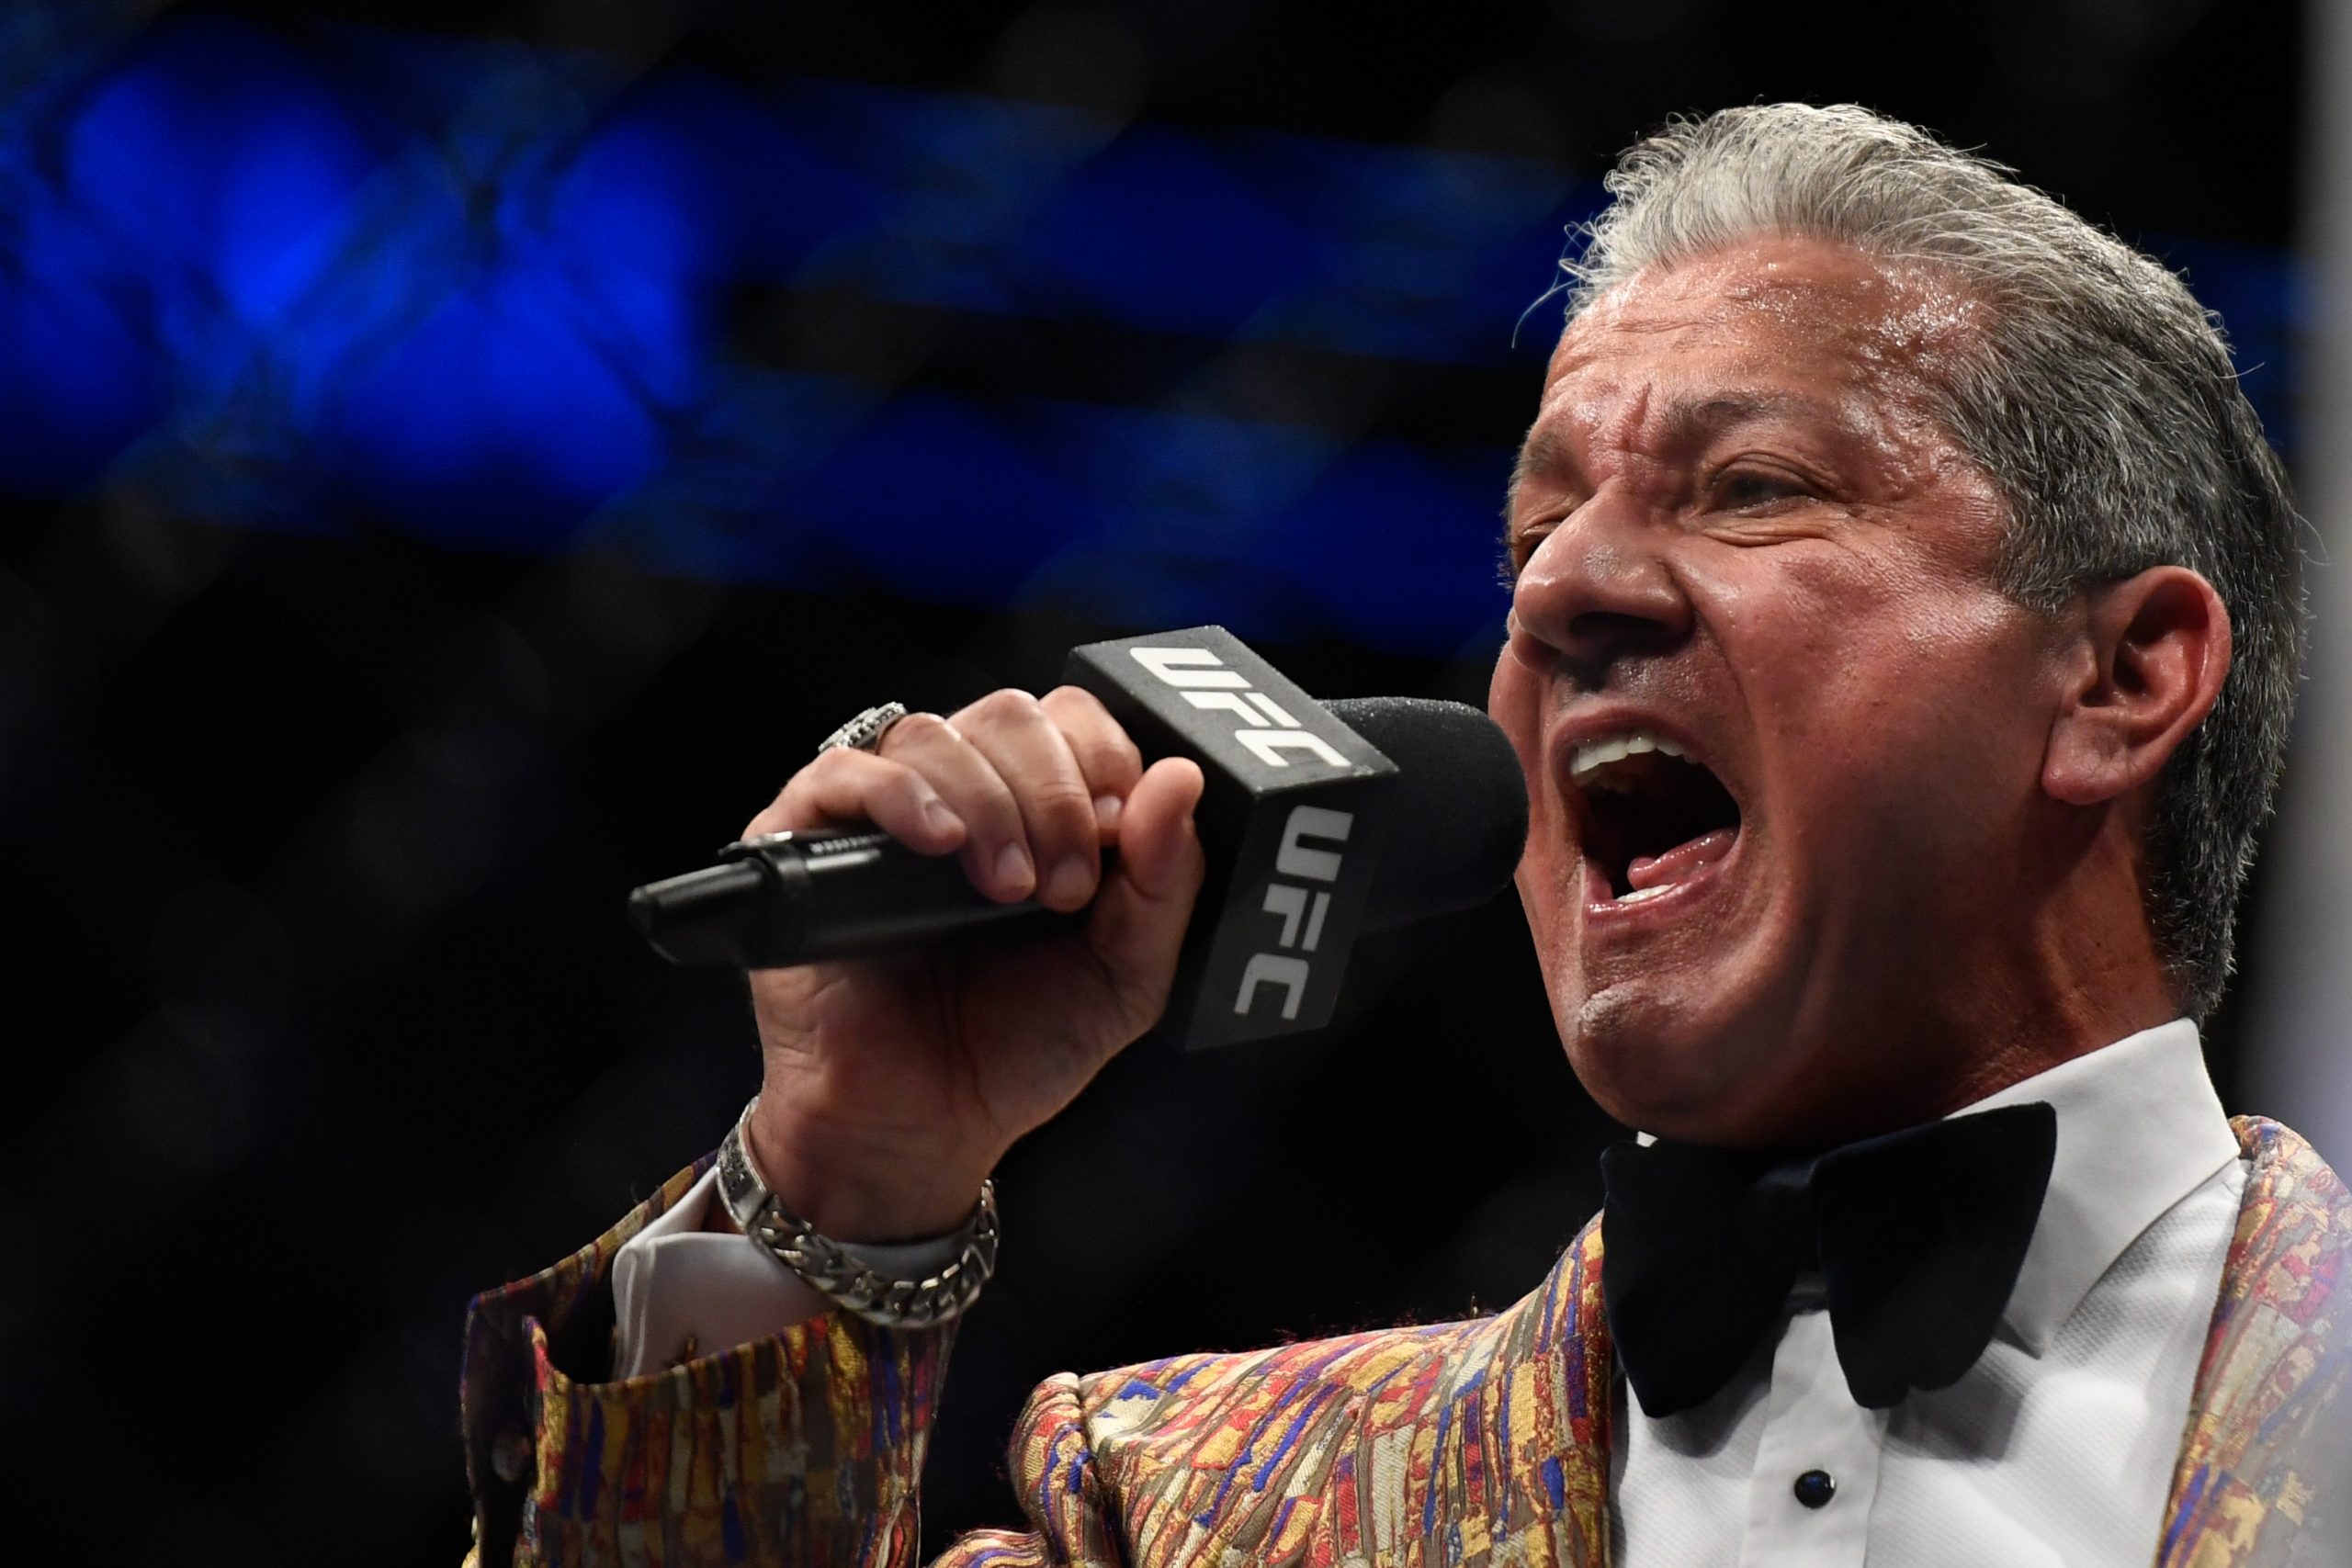 Who is worth more Michael or Bruce Buffer?